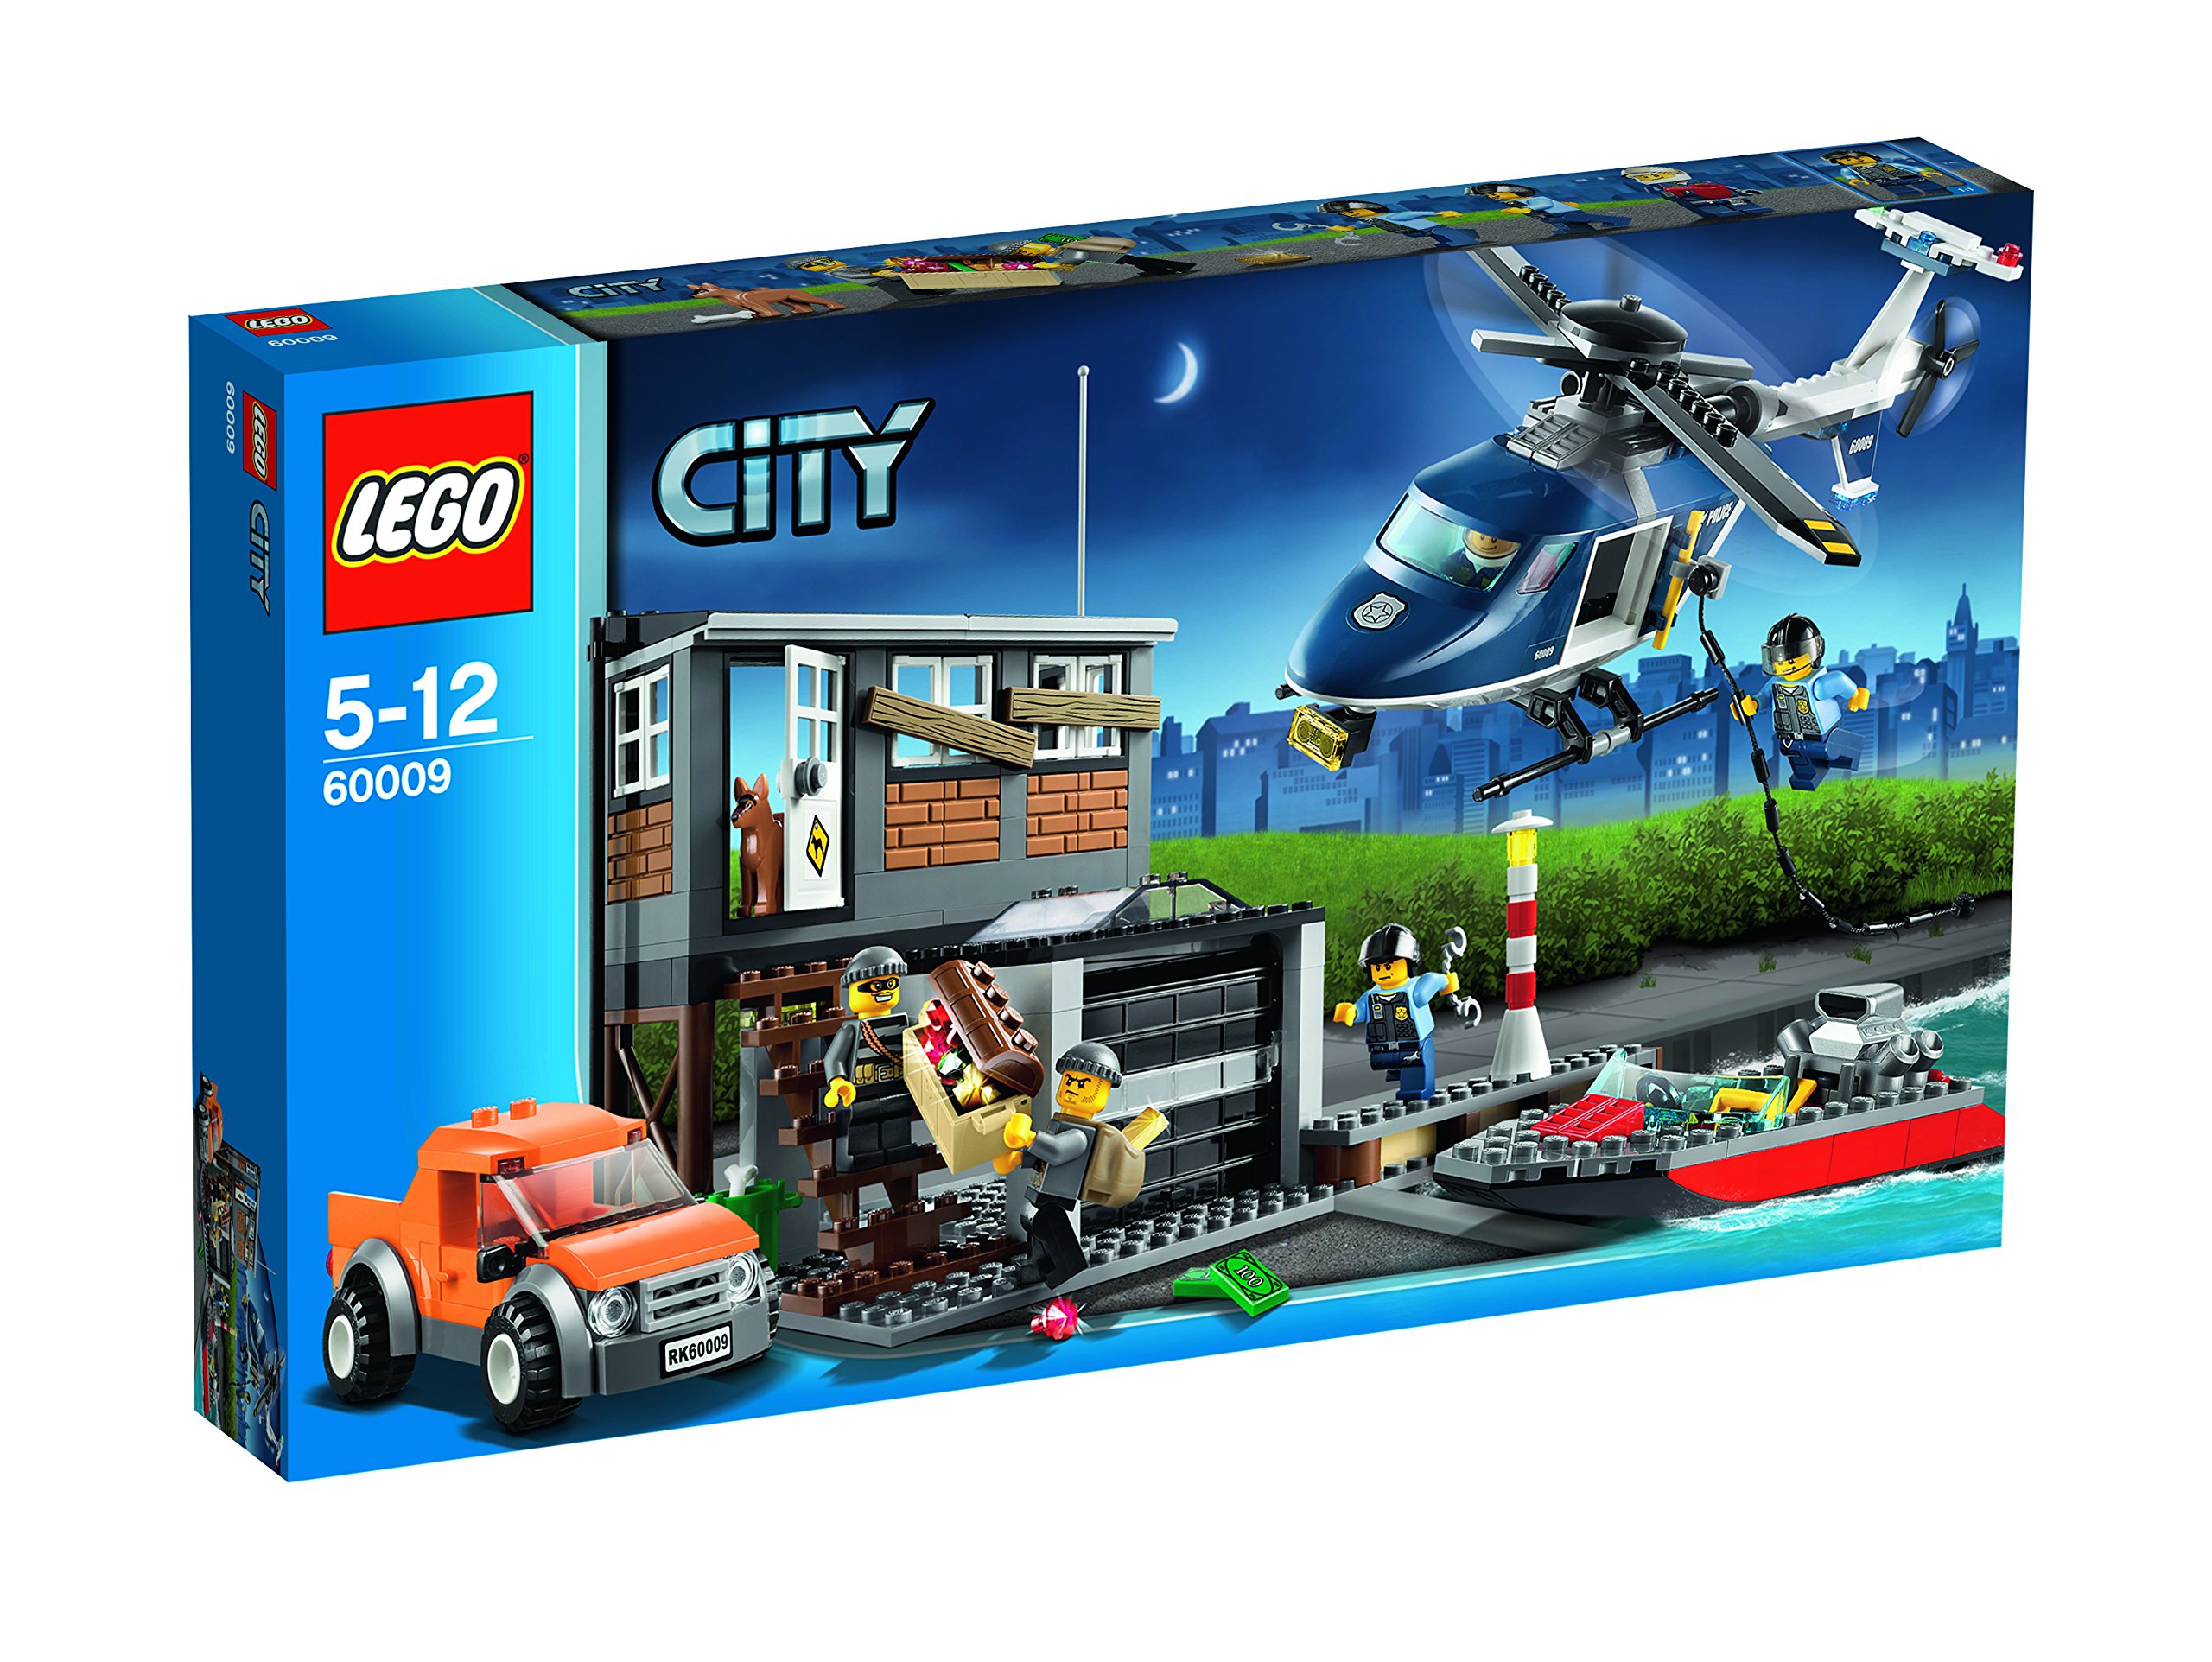 Lego City Helicopter Arrest